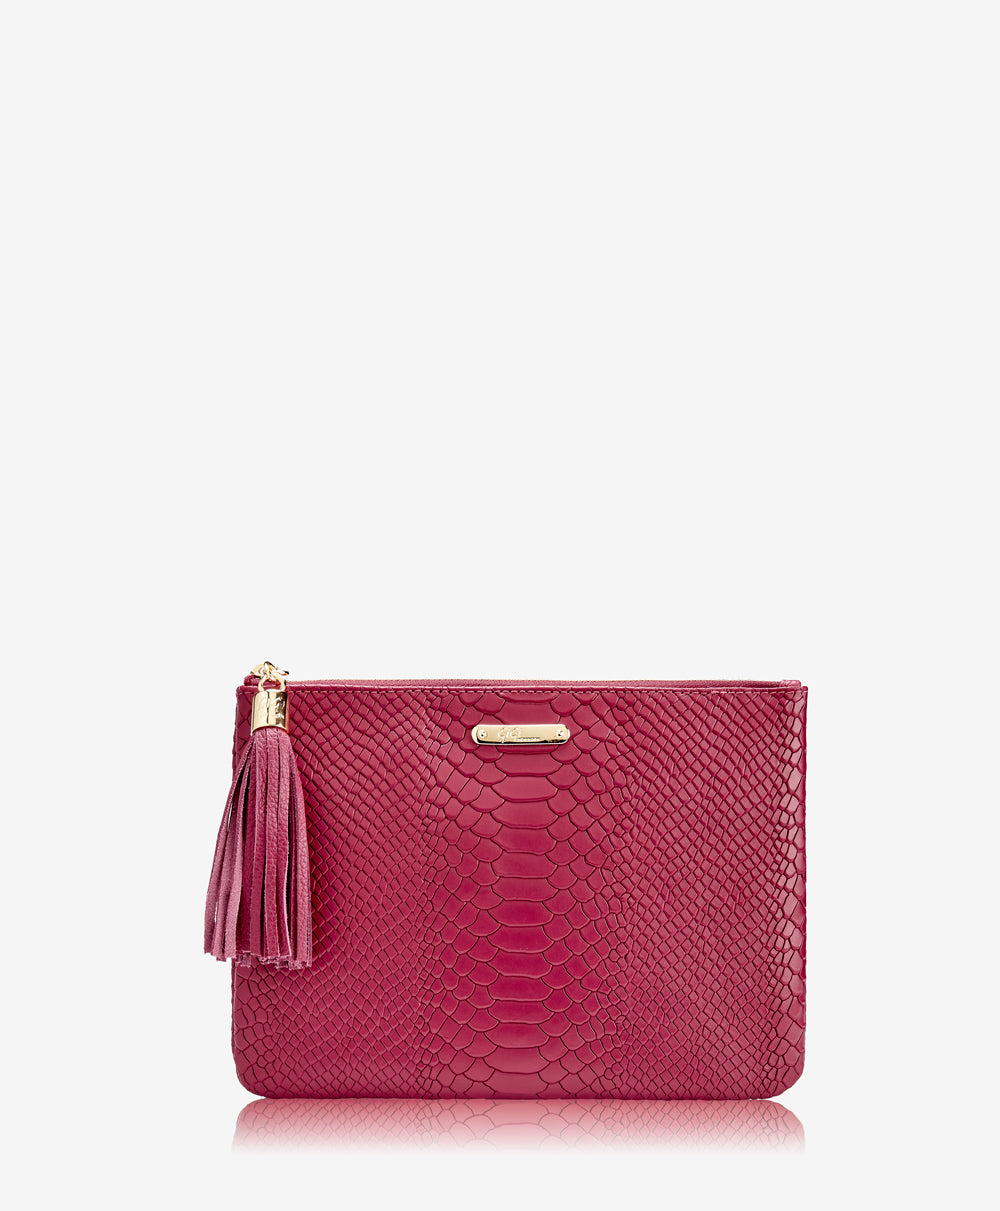 GiGi New York All In One Clutch Bag Cranberry Embossed Python Leather